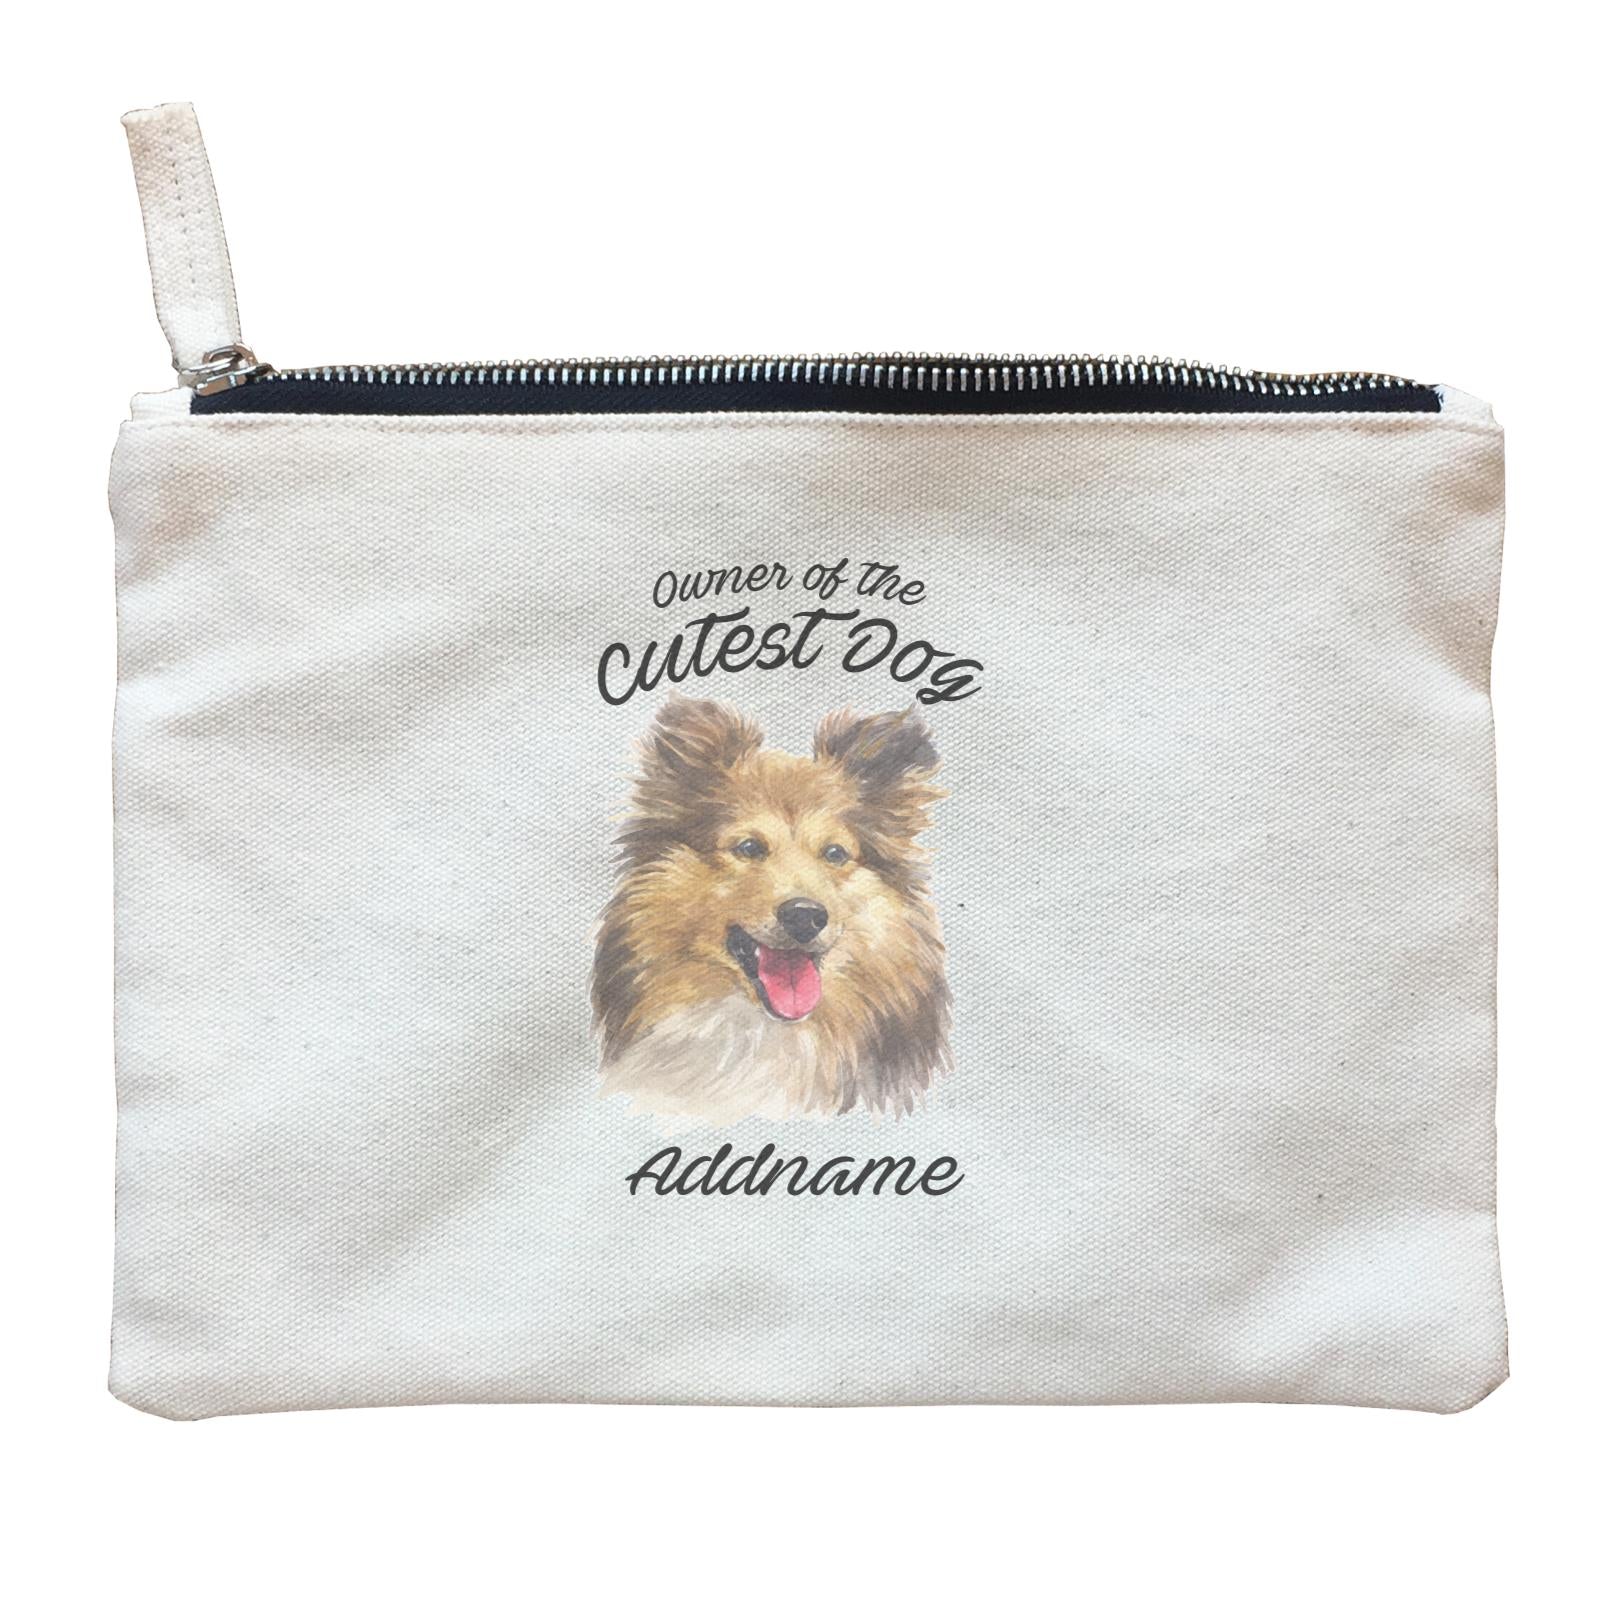 Watercolor Dog Owner Of The Cutest Dog Shetland Sheepdog Addname Zipper Pouch